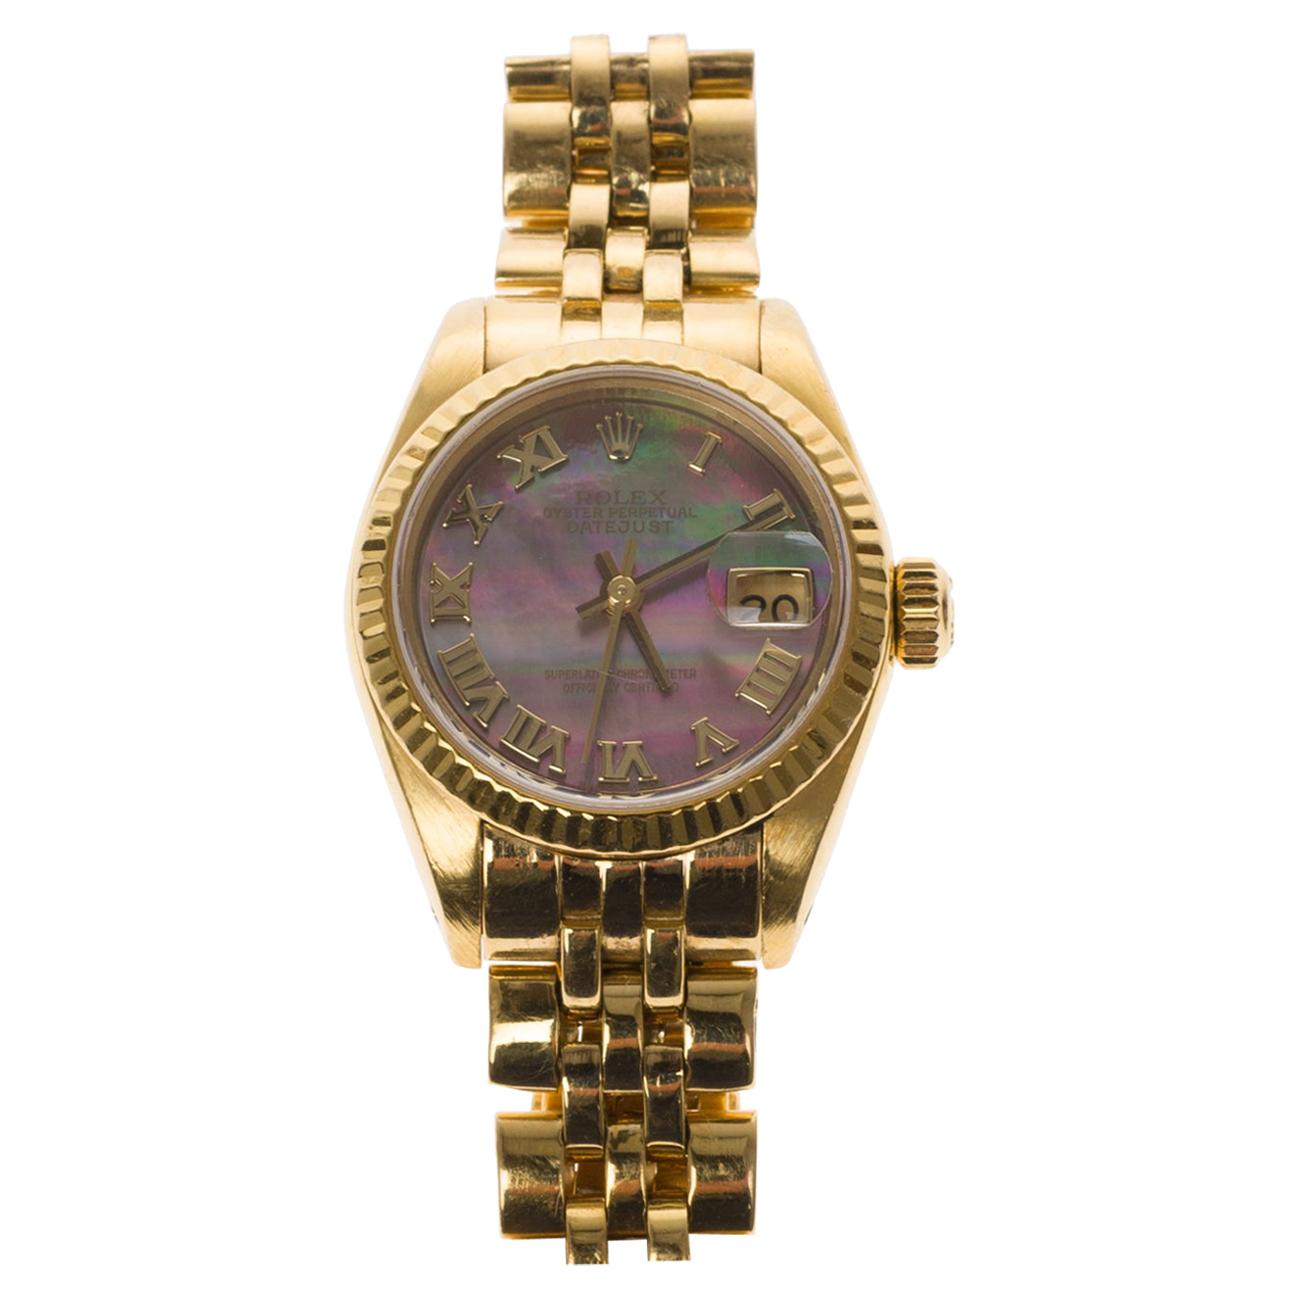 Amazing Rolex Oyster Perpetual lady in yellow gold, 24mm